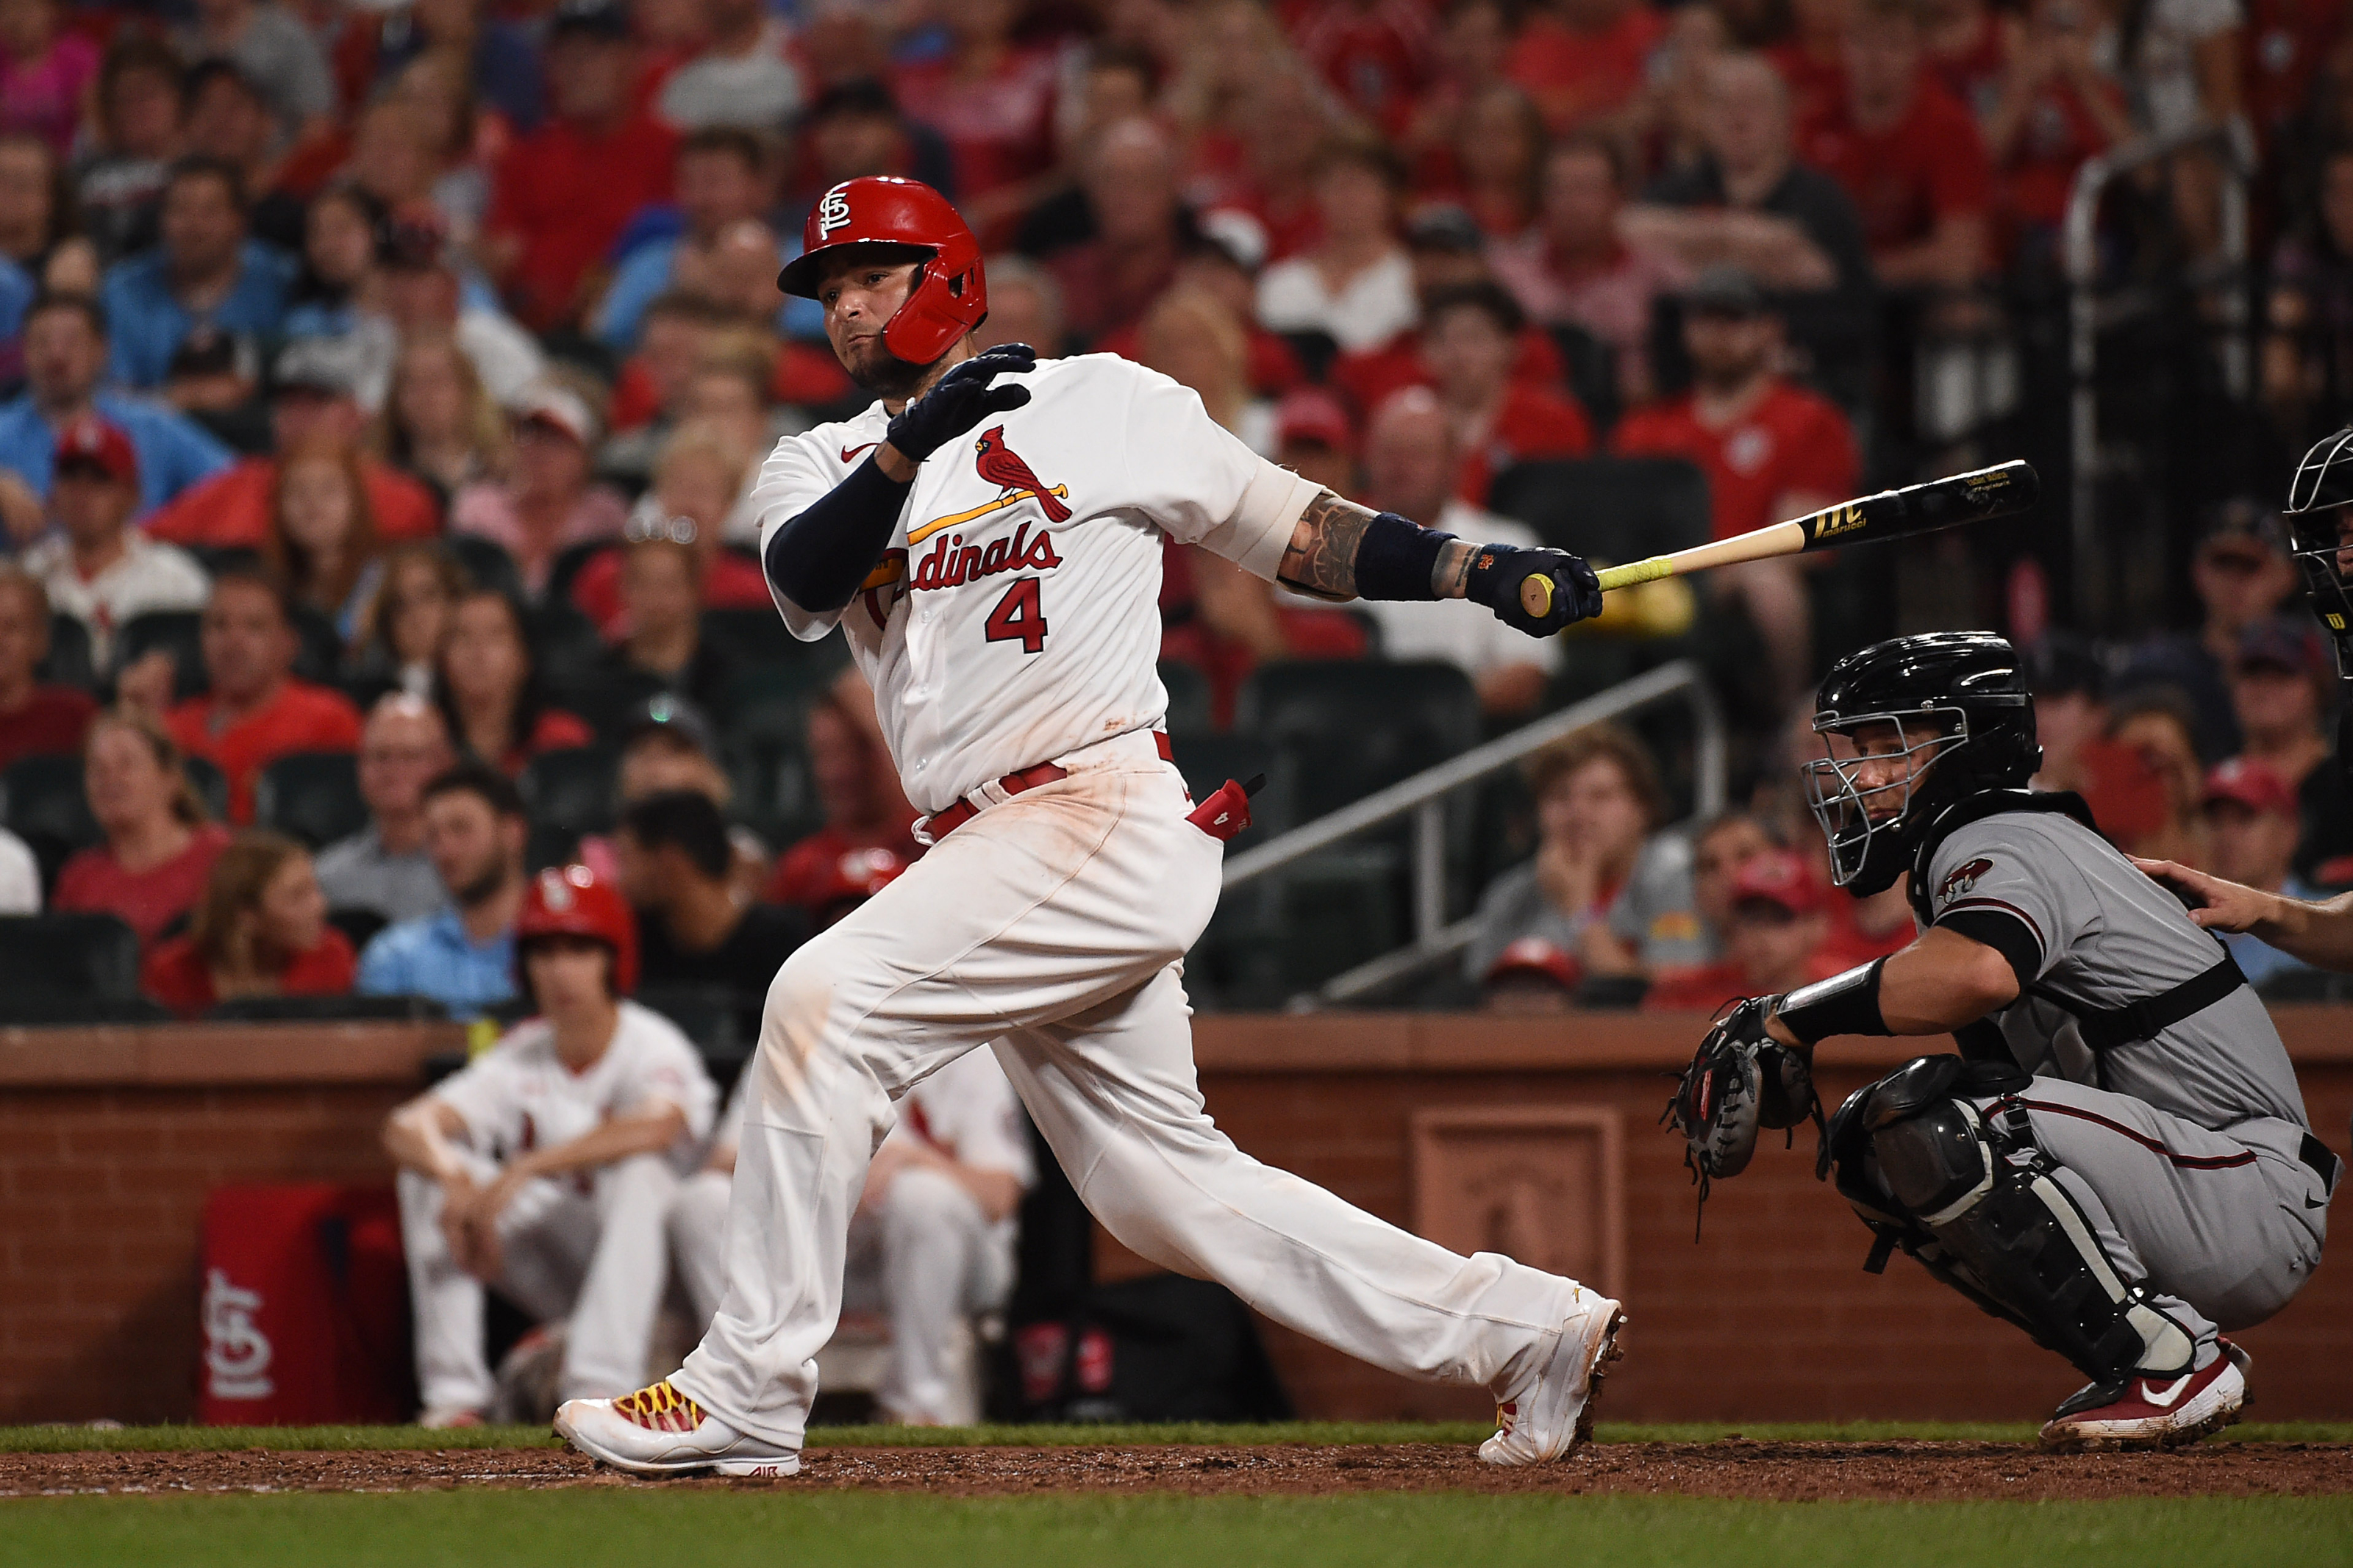 Cardinals' Yadier Molina Has First Career MLB Pitching Appearance on Sunday  - Fastball